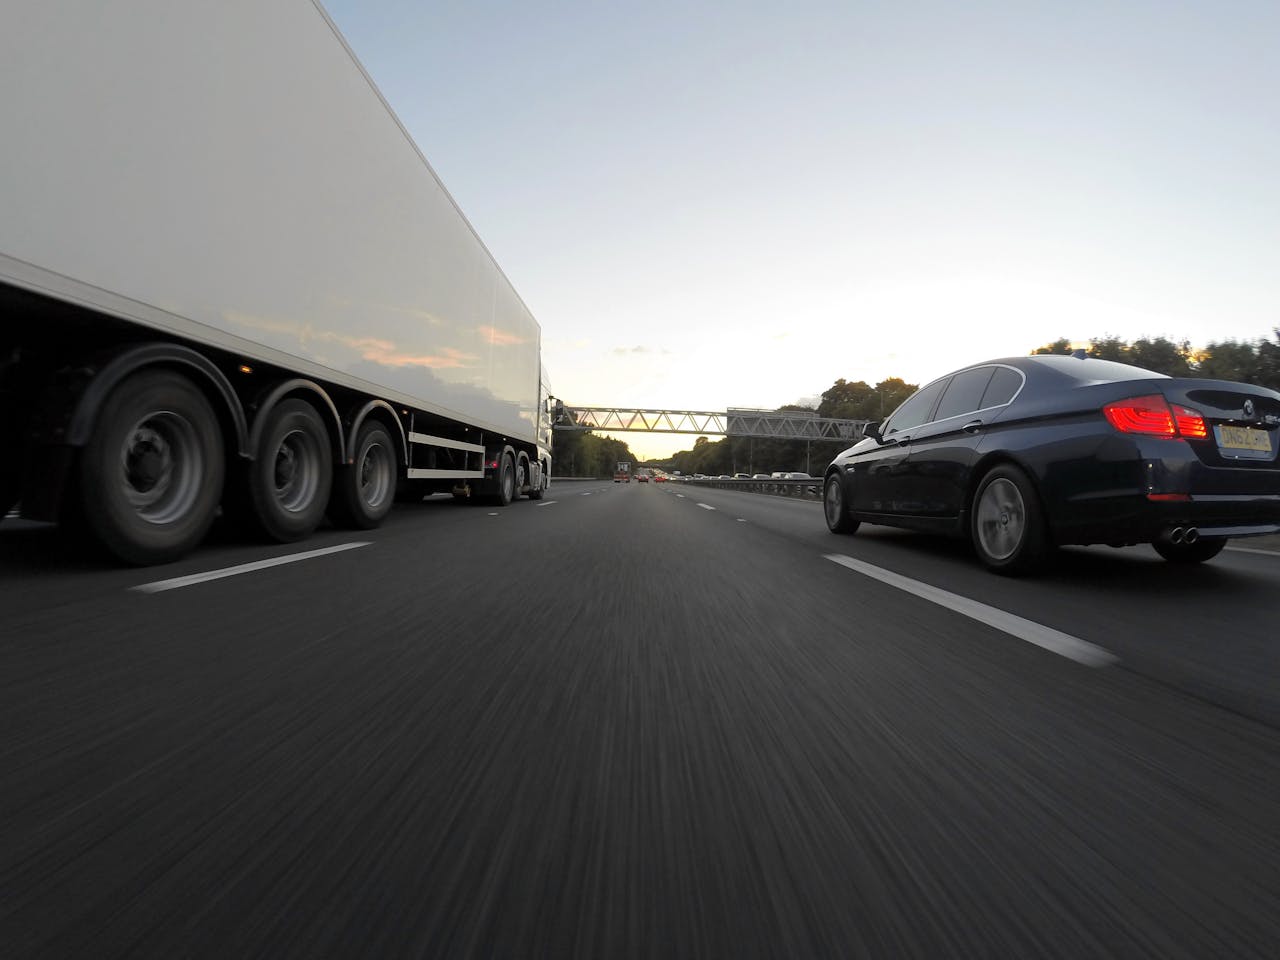 How are Truck Accidents Handled Differently From Car Accidents?